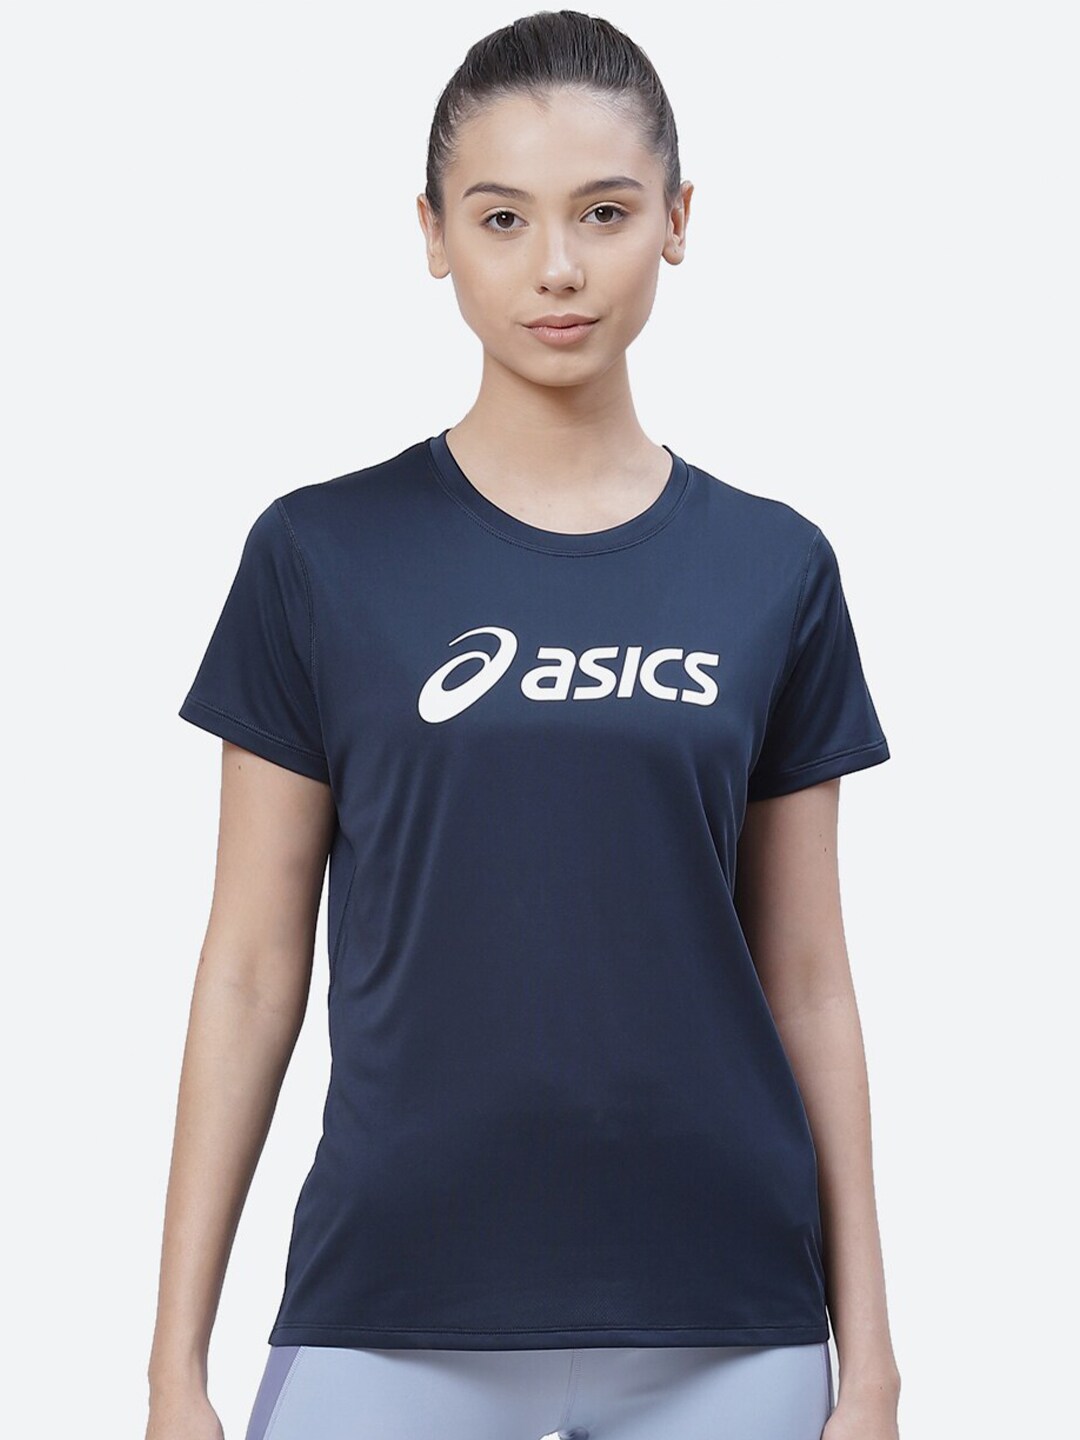 ASICS Women Blue Typography Printed SILVER Running T-shirt Price in India